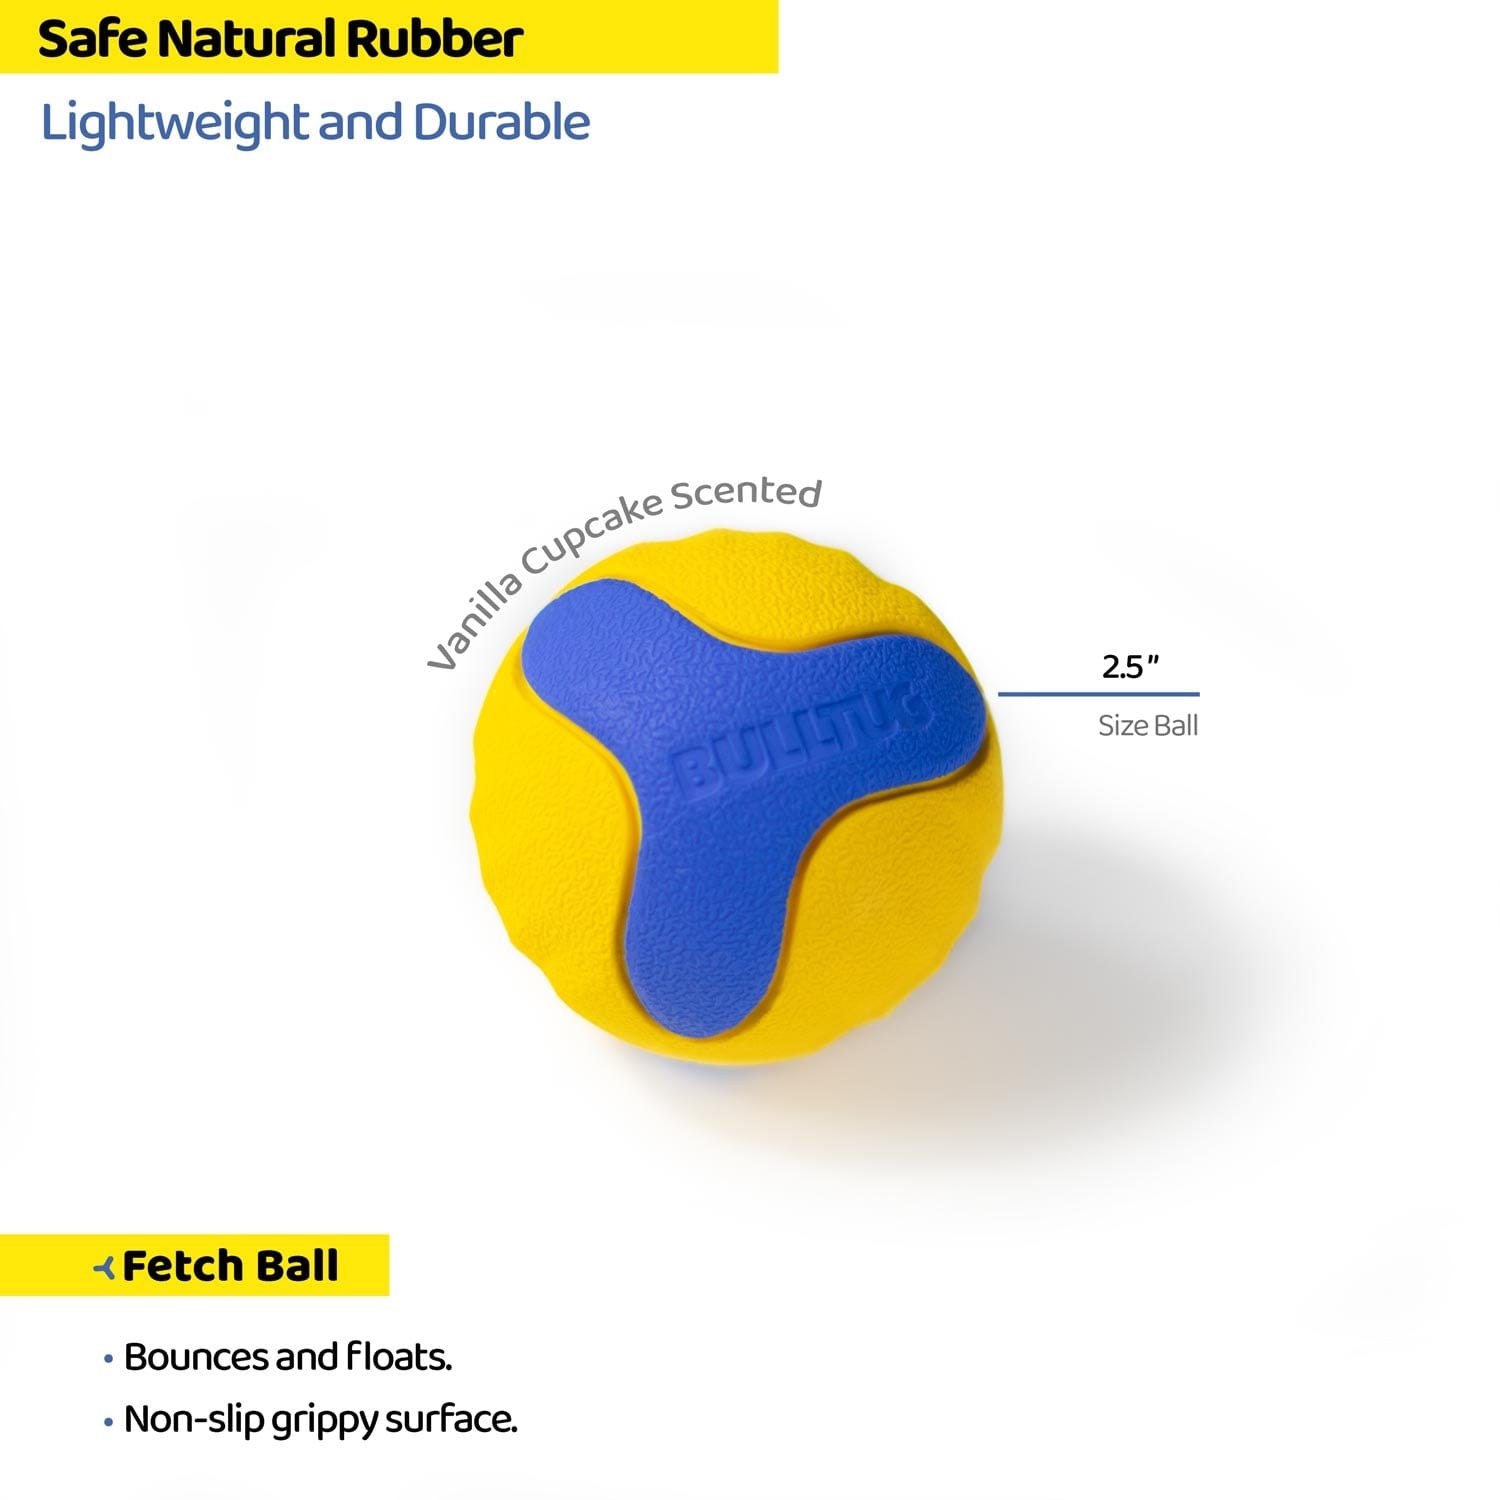 The Fetch Ball Features a Safe Natural Rubber, Vanilla Cupcake Scented, And Measures 2.5 inches